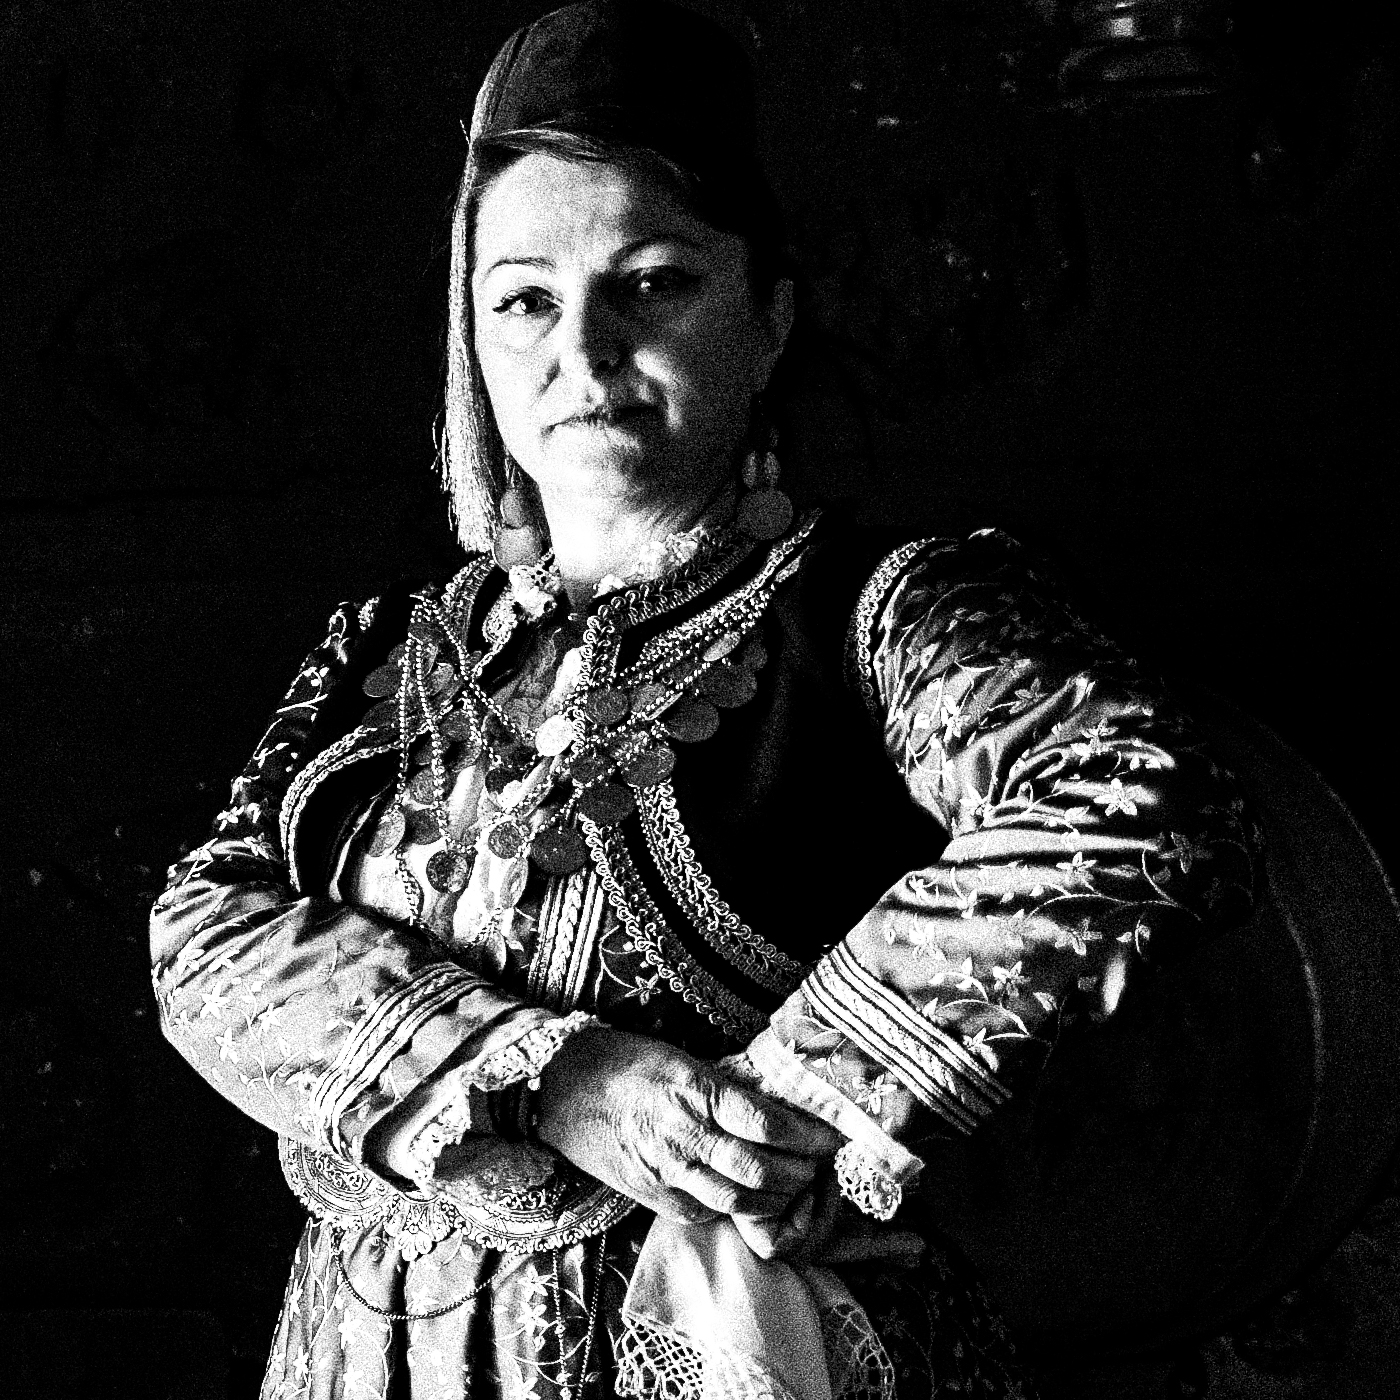 Black and White Photography Wall Art Greece | Urban costumes of Kastoria W. Macedonia by George Tatakis - detailed view